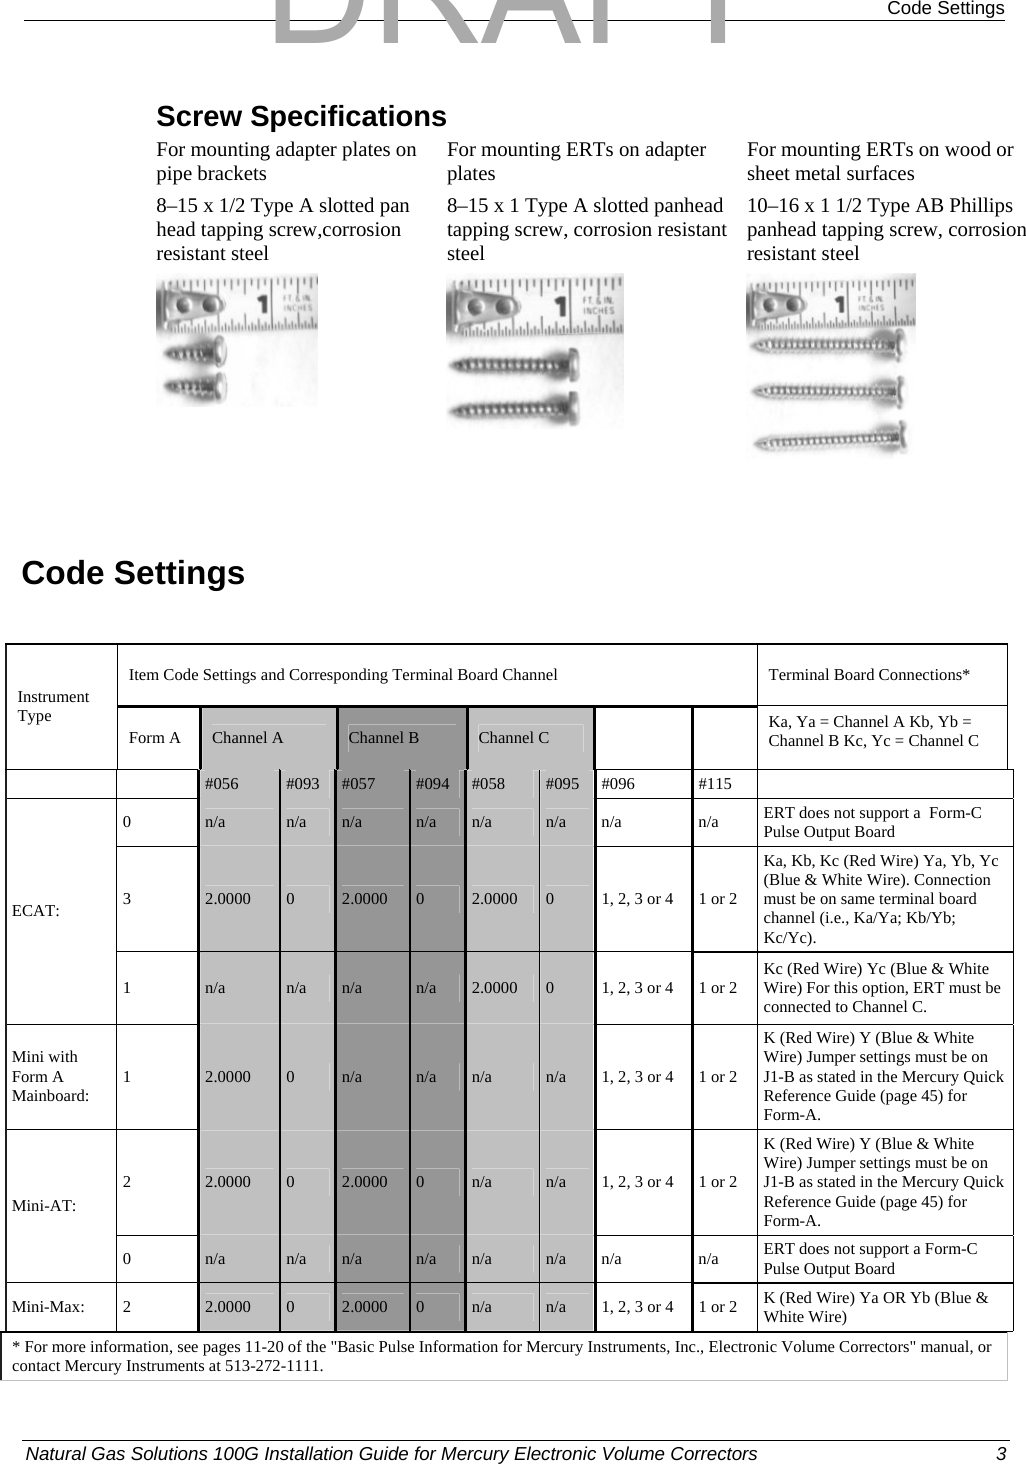  Code Settings Screw Specifications For mounting adapter plates on pipe brackets  For mounting ERTs on adapter plates  For mounting ERTs on wood or sheet metal surfaces 8–15 x 1/2 Type A slotted pan head tapping screw,corrosion resistant steel 8–15 x 1 Type A slotted panhead tapping screw, corrosion resistant steel 10–16 x 1 1/2 Type AB Phillips panhead tapping screw, corrosion resistant steel      Code Settings  Item Code Settings and Corresponding Terminal Board Channel  Terminal Board Connections* Instrument Type Form A  Channel A  Channel B  Channel C    Ka, Ya = Channel A Kb, Yb = Channel B Kc, Yc = Channel C   #056  #093  #057  #094  #058  #095 #096  #115   0  n/a  n/a  n/a  n/a  n/a  n/a n/a  n/a  ERT does not support a  Form-C Pulse Output Board 3  2.0000  0  2.0000  0  2.0000  0  1, 2, 3 or 4  1 or 2 Ka, Kb, Kc (Red Wire) Ya, Yb, Yc (Blue &amp; White Wire). Connection must be on same terminal board channel (i.e., Ka/Ya; Kb/Yb; Kc/Yc). ECAT: 1  n/a  n/a  n/a  n/a  2.0000  0  1, 2, 3 or 4  1 or 2  Kc (Red Wire) Yc (Blue &amp; White Wire) For this option, ERT must be connected to Channel C. Mini with Form A Mainboard:  1  2.0000  0  n/a  n/a  n/a  n/a  1, 2, 3 or 4  1 or 2 K (Red Wire) Y (Blue &amp; White Wire) Jumper settings must be on J1-B as stated in the Mercury Quick Reference Guide (page 45) for Form-A. 2  2.0000  0  2.0000  0  n/a  n/a  1, 2, 3 or 4  1 or 2 K (Red Wire) Y (Blue &amp; White Wire) Jumper settings must be on J1-B as stated in the Mercury Quick Reference Guide (page 45) for Form-A. Mini-AT: 0  n/a  n/a  n/a  n/a  n/a  n/a n/a  n/a  ERT does not support a Form-C Pulse Output Board Mini-Max: 2  2.0000  0  2.0000  0  n/a   n/a  1, 2, 3 or 4  1 or 2  K (Red Wire) Ya OR Yb (Blue &amp; White Wire) * For more information, see pages 11-20 of the &quot;Basic Pulse Information for Mercury Instruments, Inc., Electronic Volume Correctors&quot; manual, or contact Mercury Instruments at 513-272-1111.  Natural Gas Solutions 100G Installation Guide for Mercury Electronic Volume Correctors  3  DRAFT